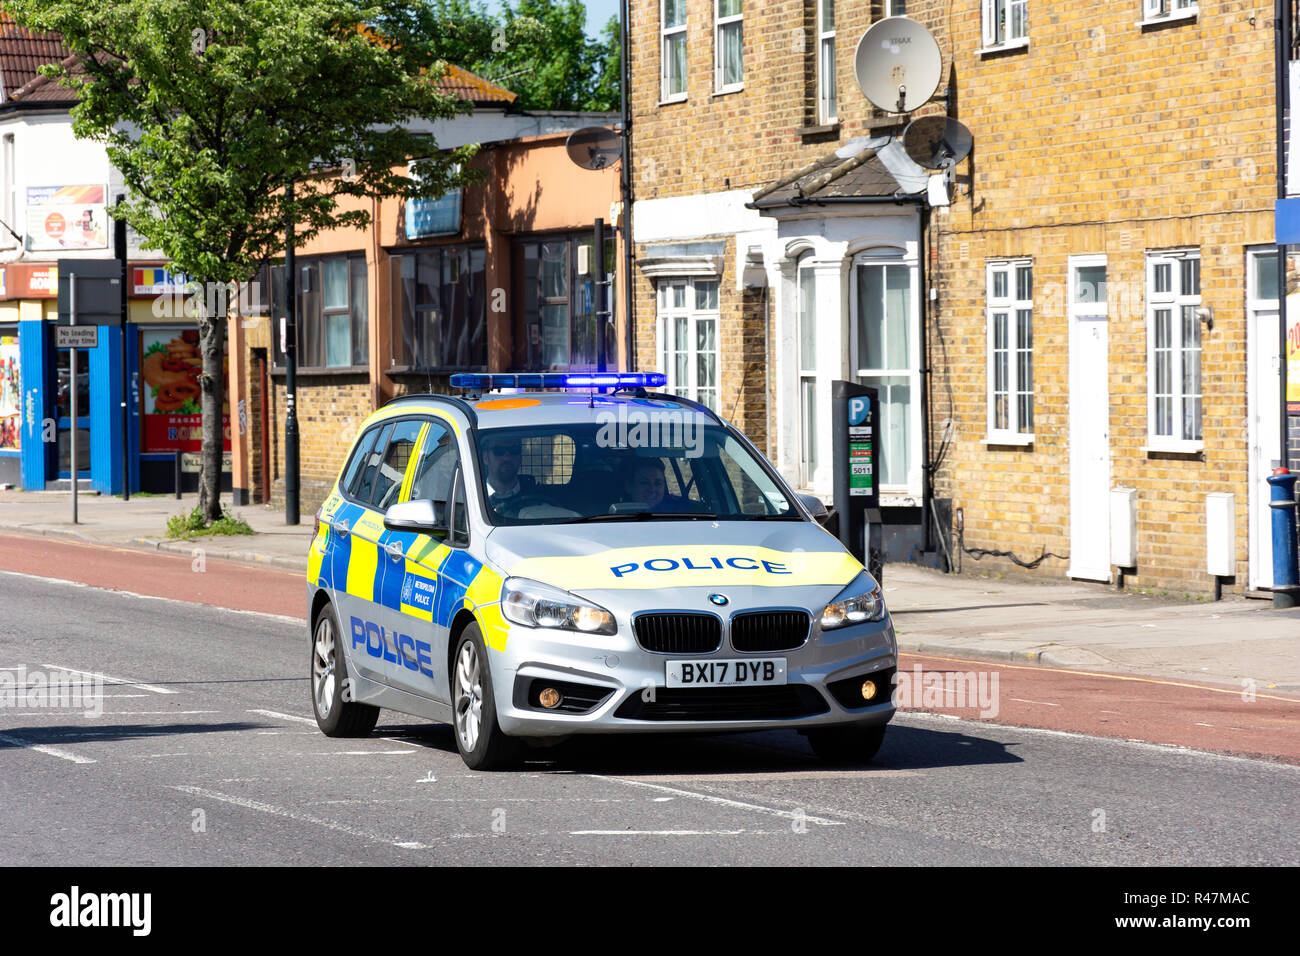 Voiture de police à l'appel, High Road, Willesden Green, Willesden, London Borough of Brent, Greater London, Angleterre, Royaume-Uni Banque D'Images